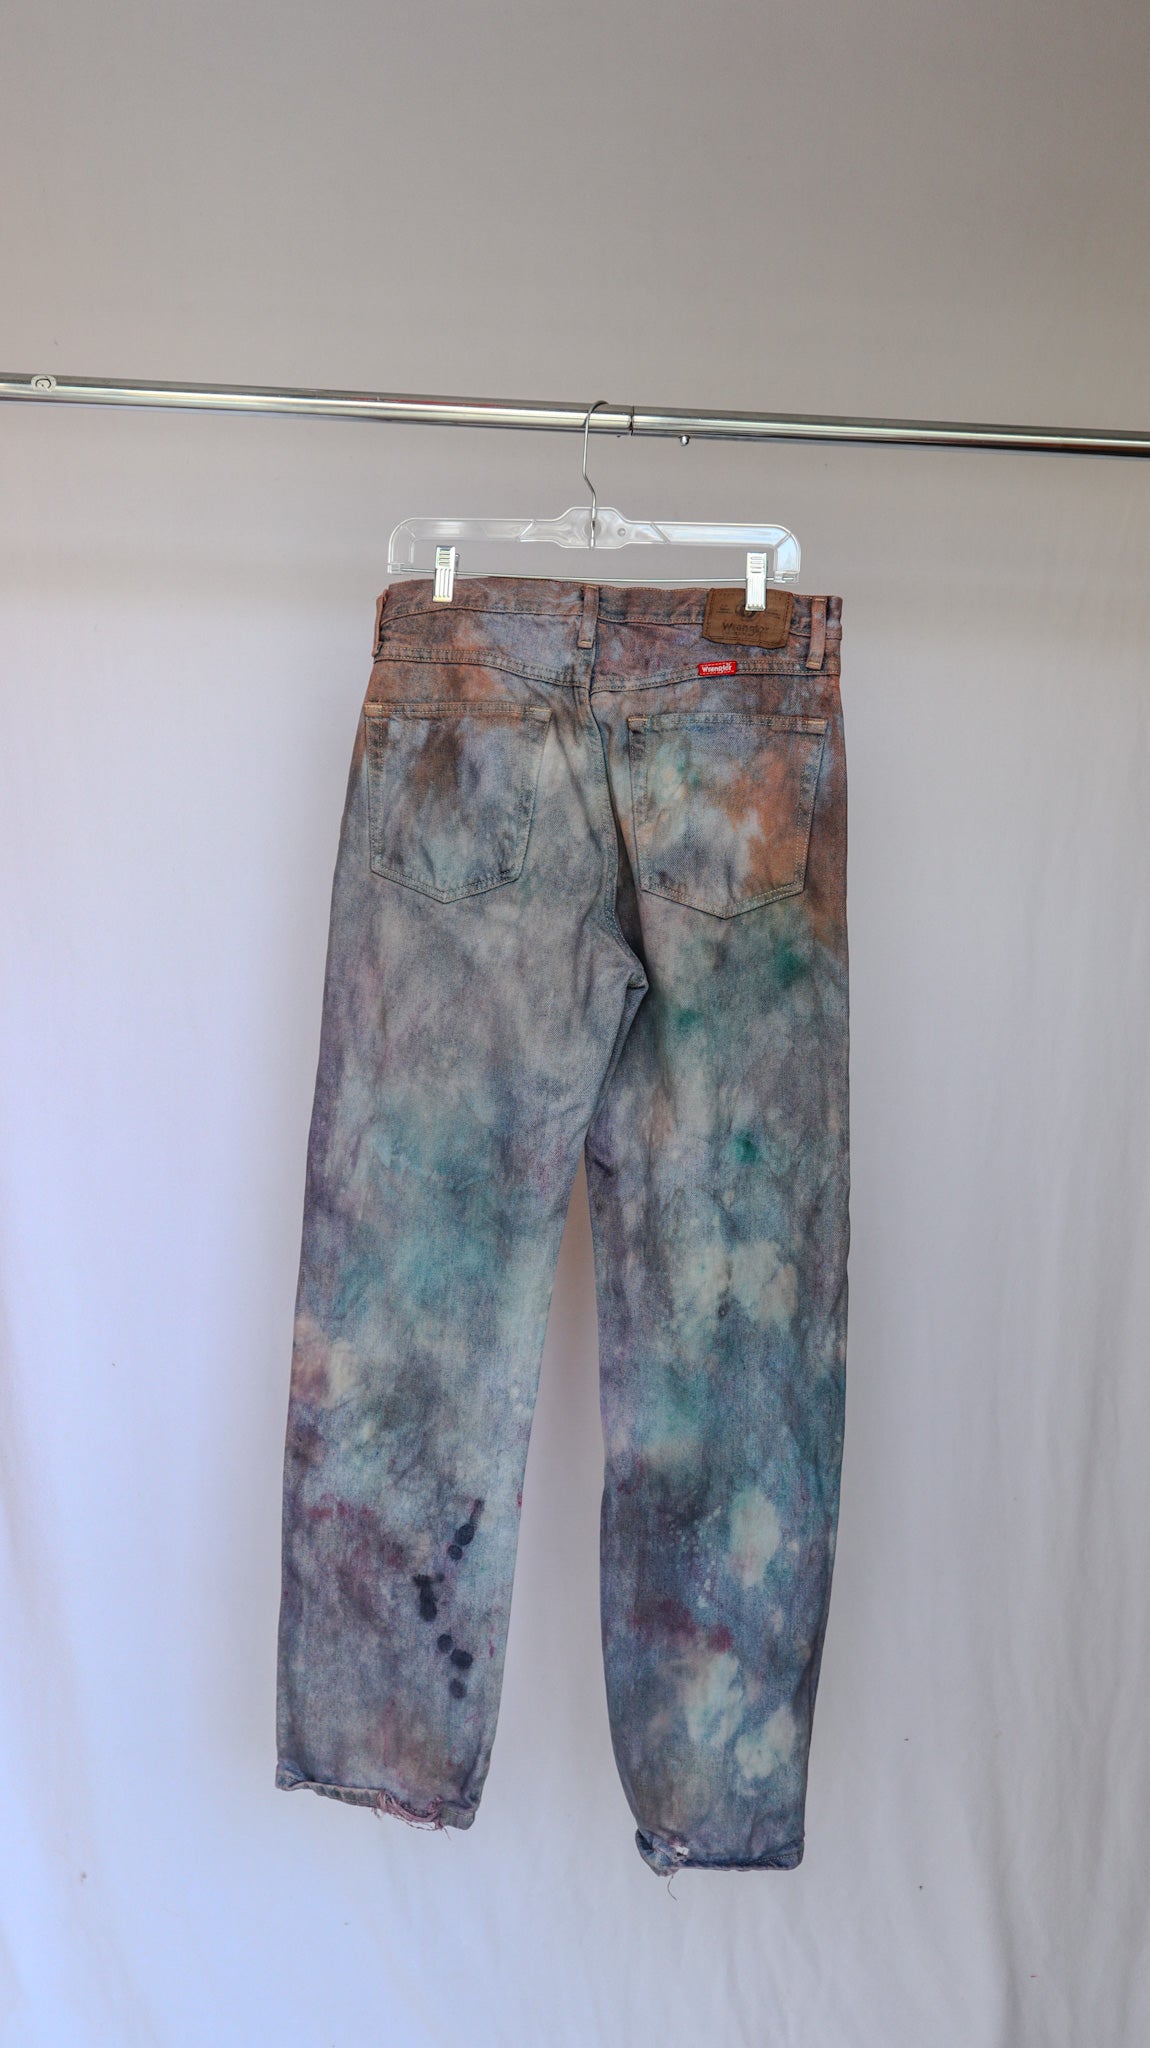 1 OF 1 CUSTOM DYED JEANS